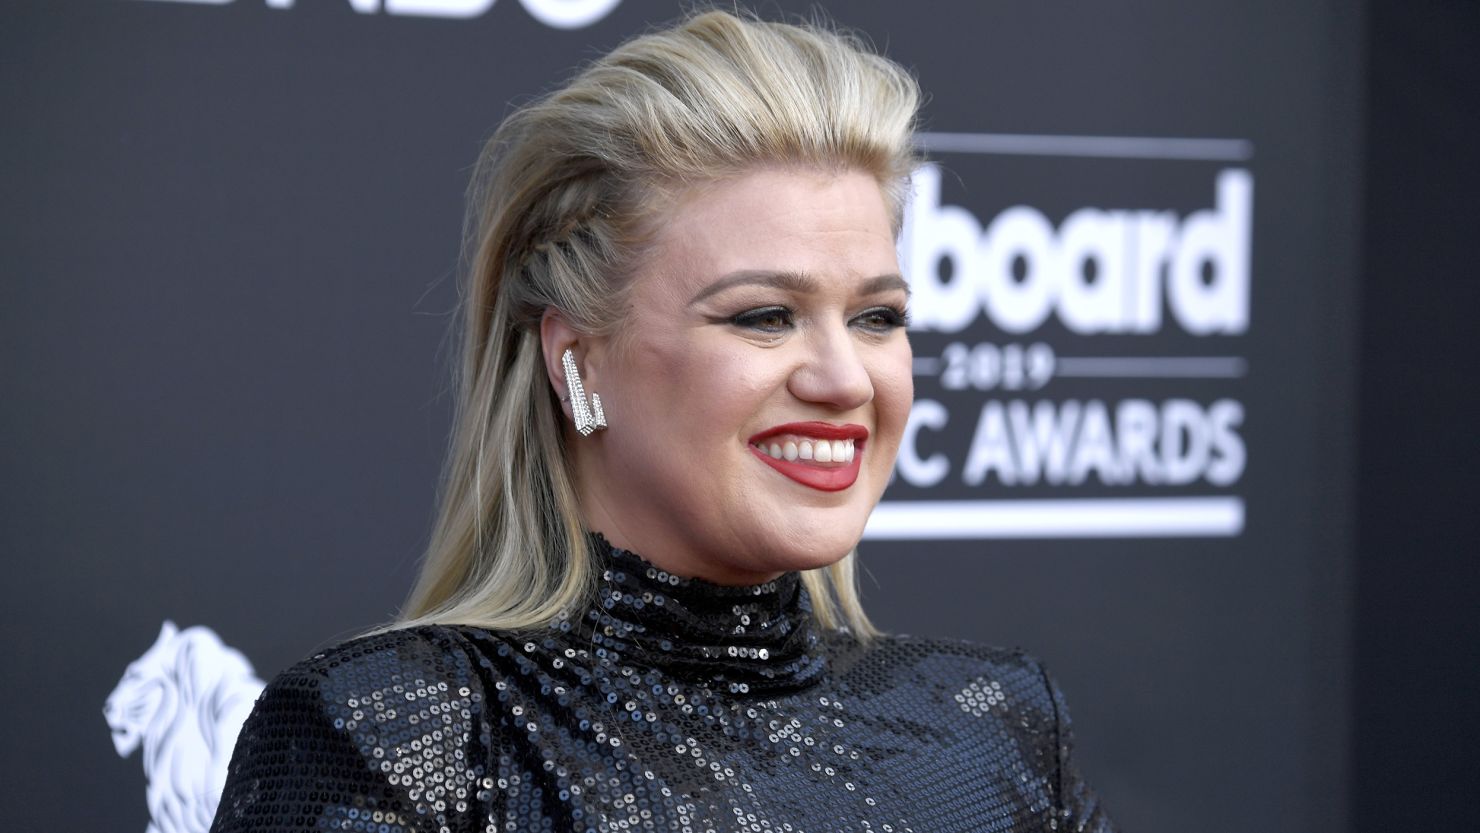 LAS VEGAS, NEVADA - MAY 01: Host Kelly Clarkson attends the 2019 Billboard Music Awards at MGM Grand Garden Arena on May 01, 2019 in Las Vegas, Nevada. (Photo by Frazer Harrison/Getty Images)